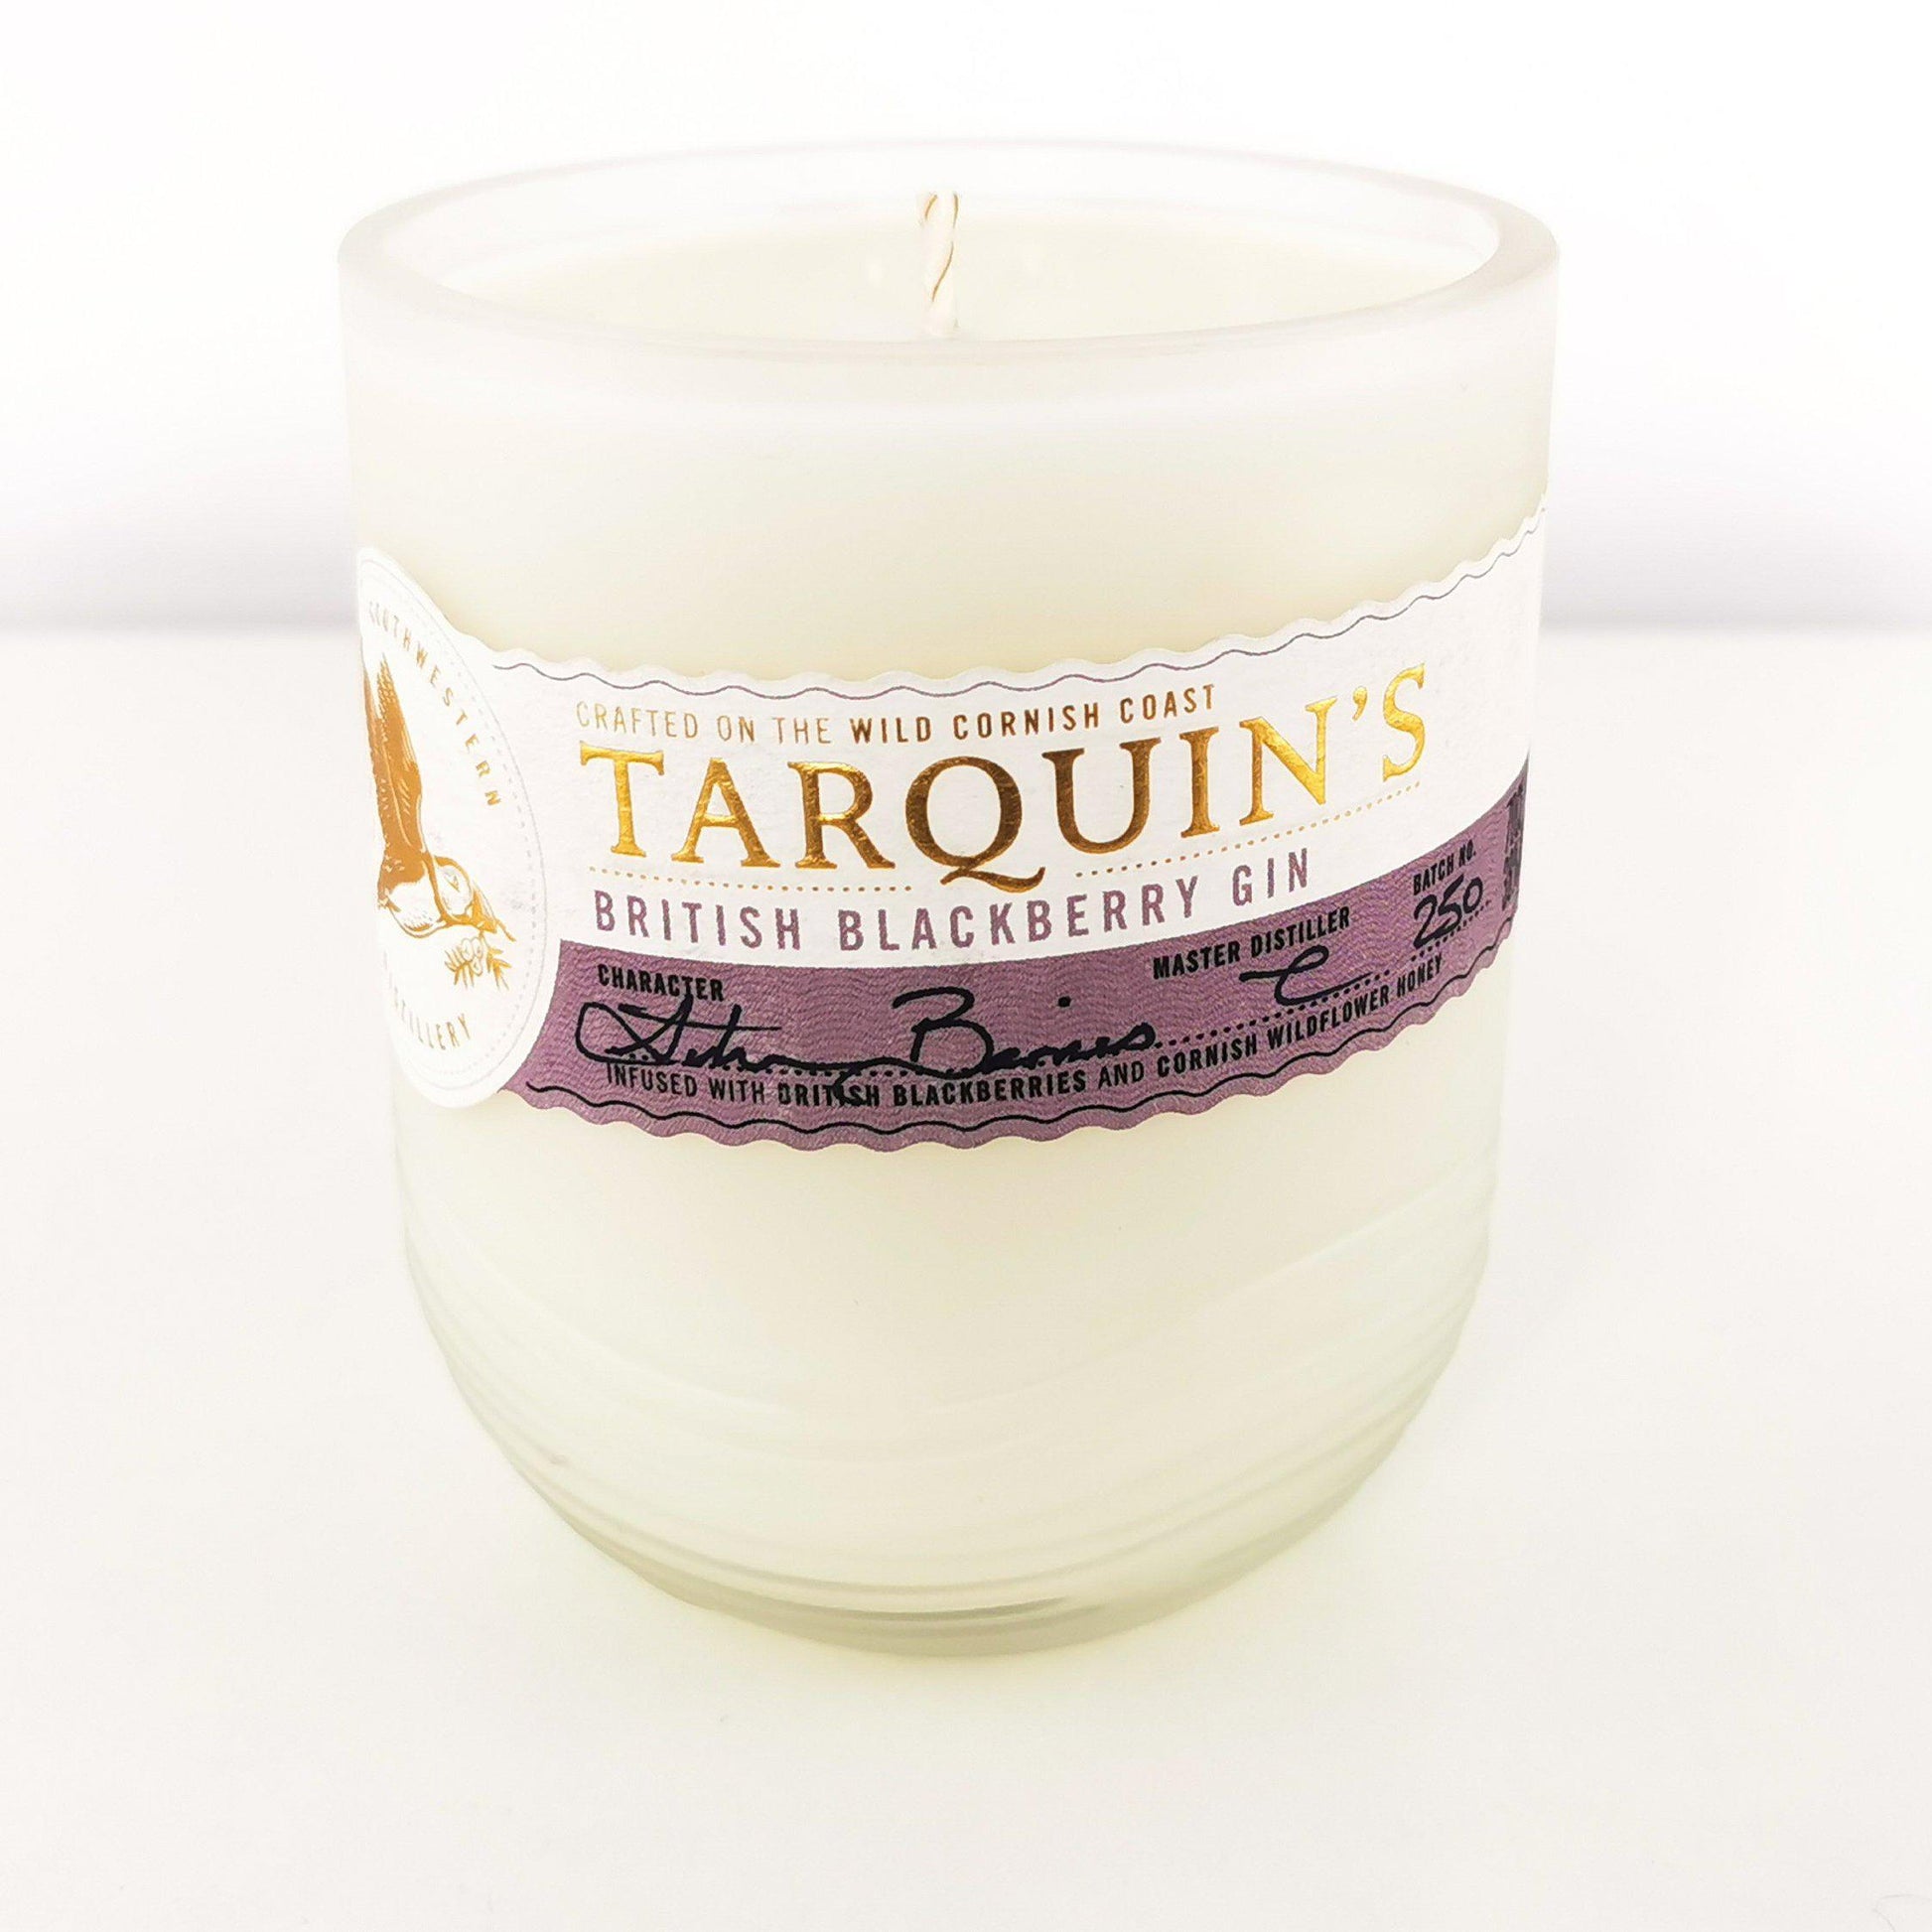 Tarquins Blackberry Gin Bottle Candle Gin Bottle Candles Adhock Homeware